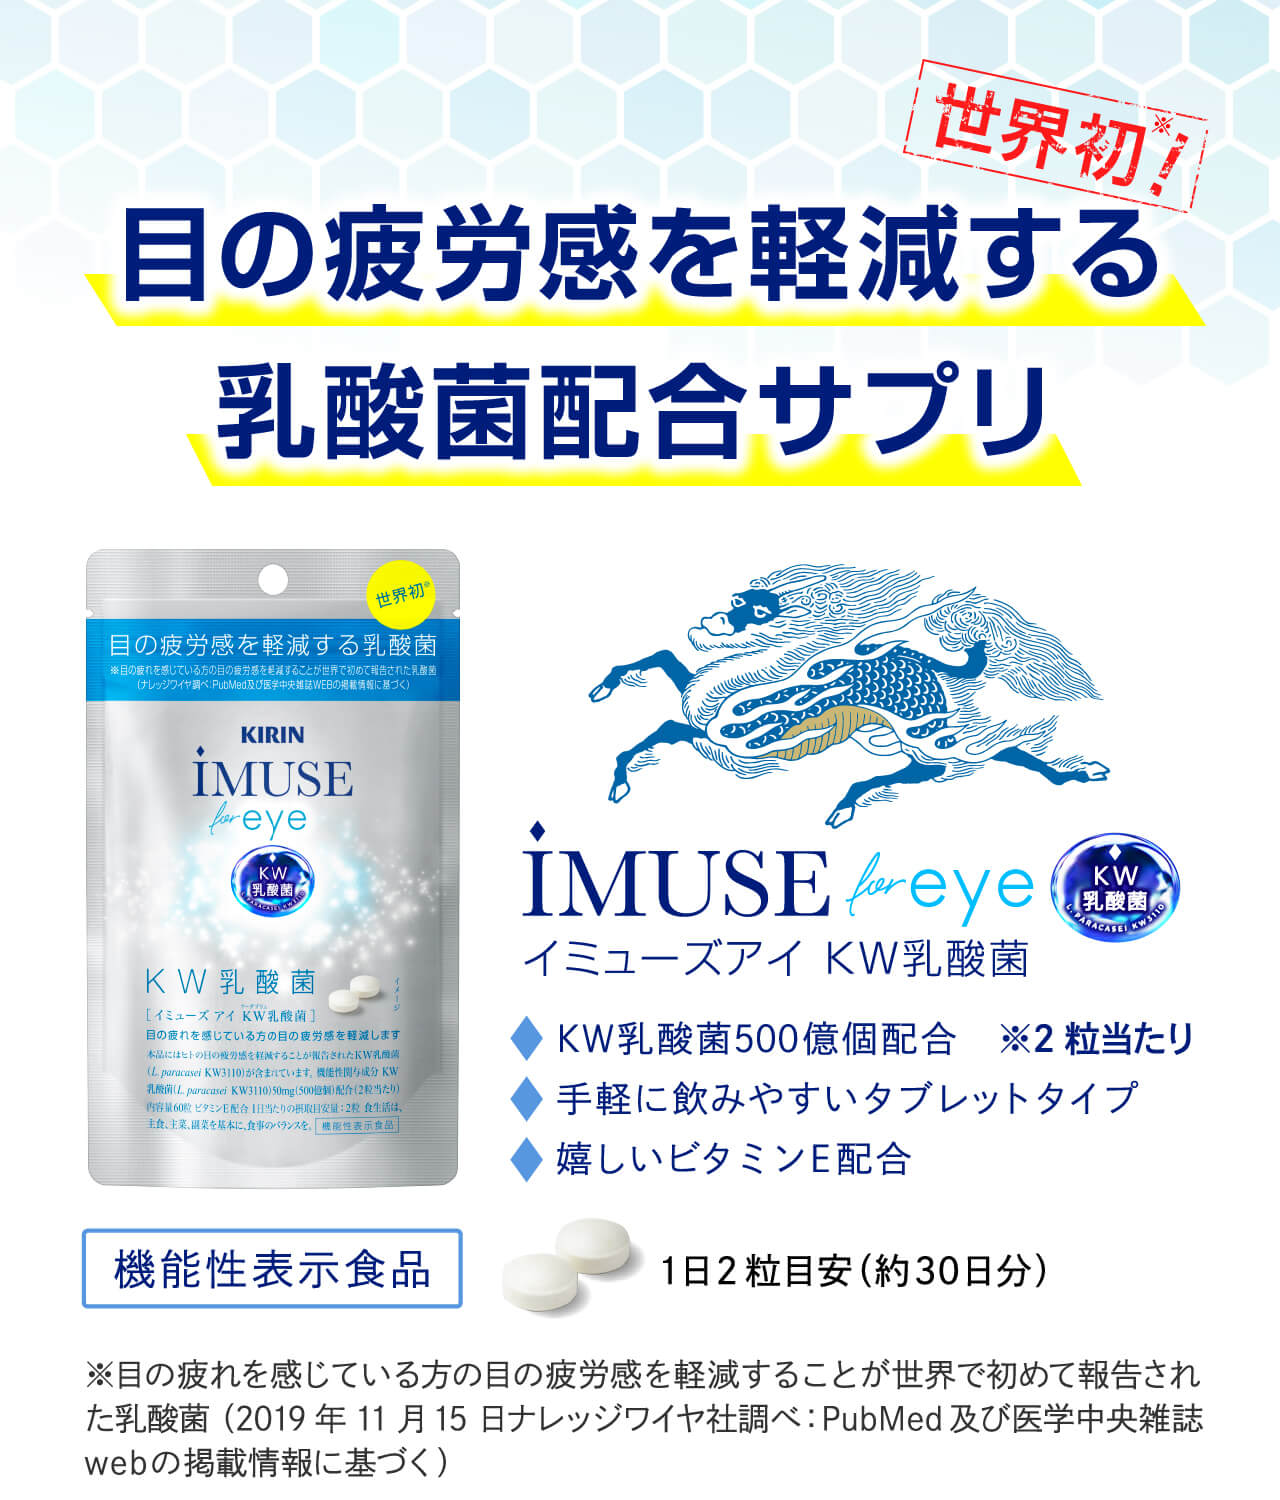 iMUSE eye KW乳酸菌